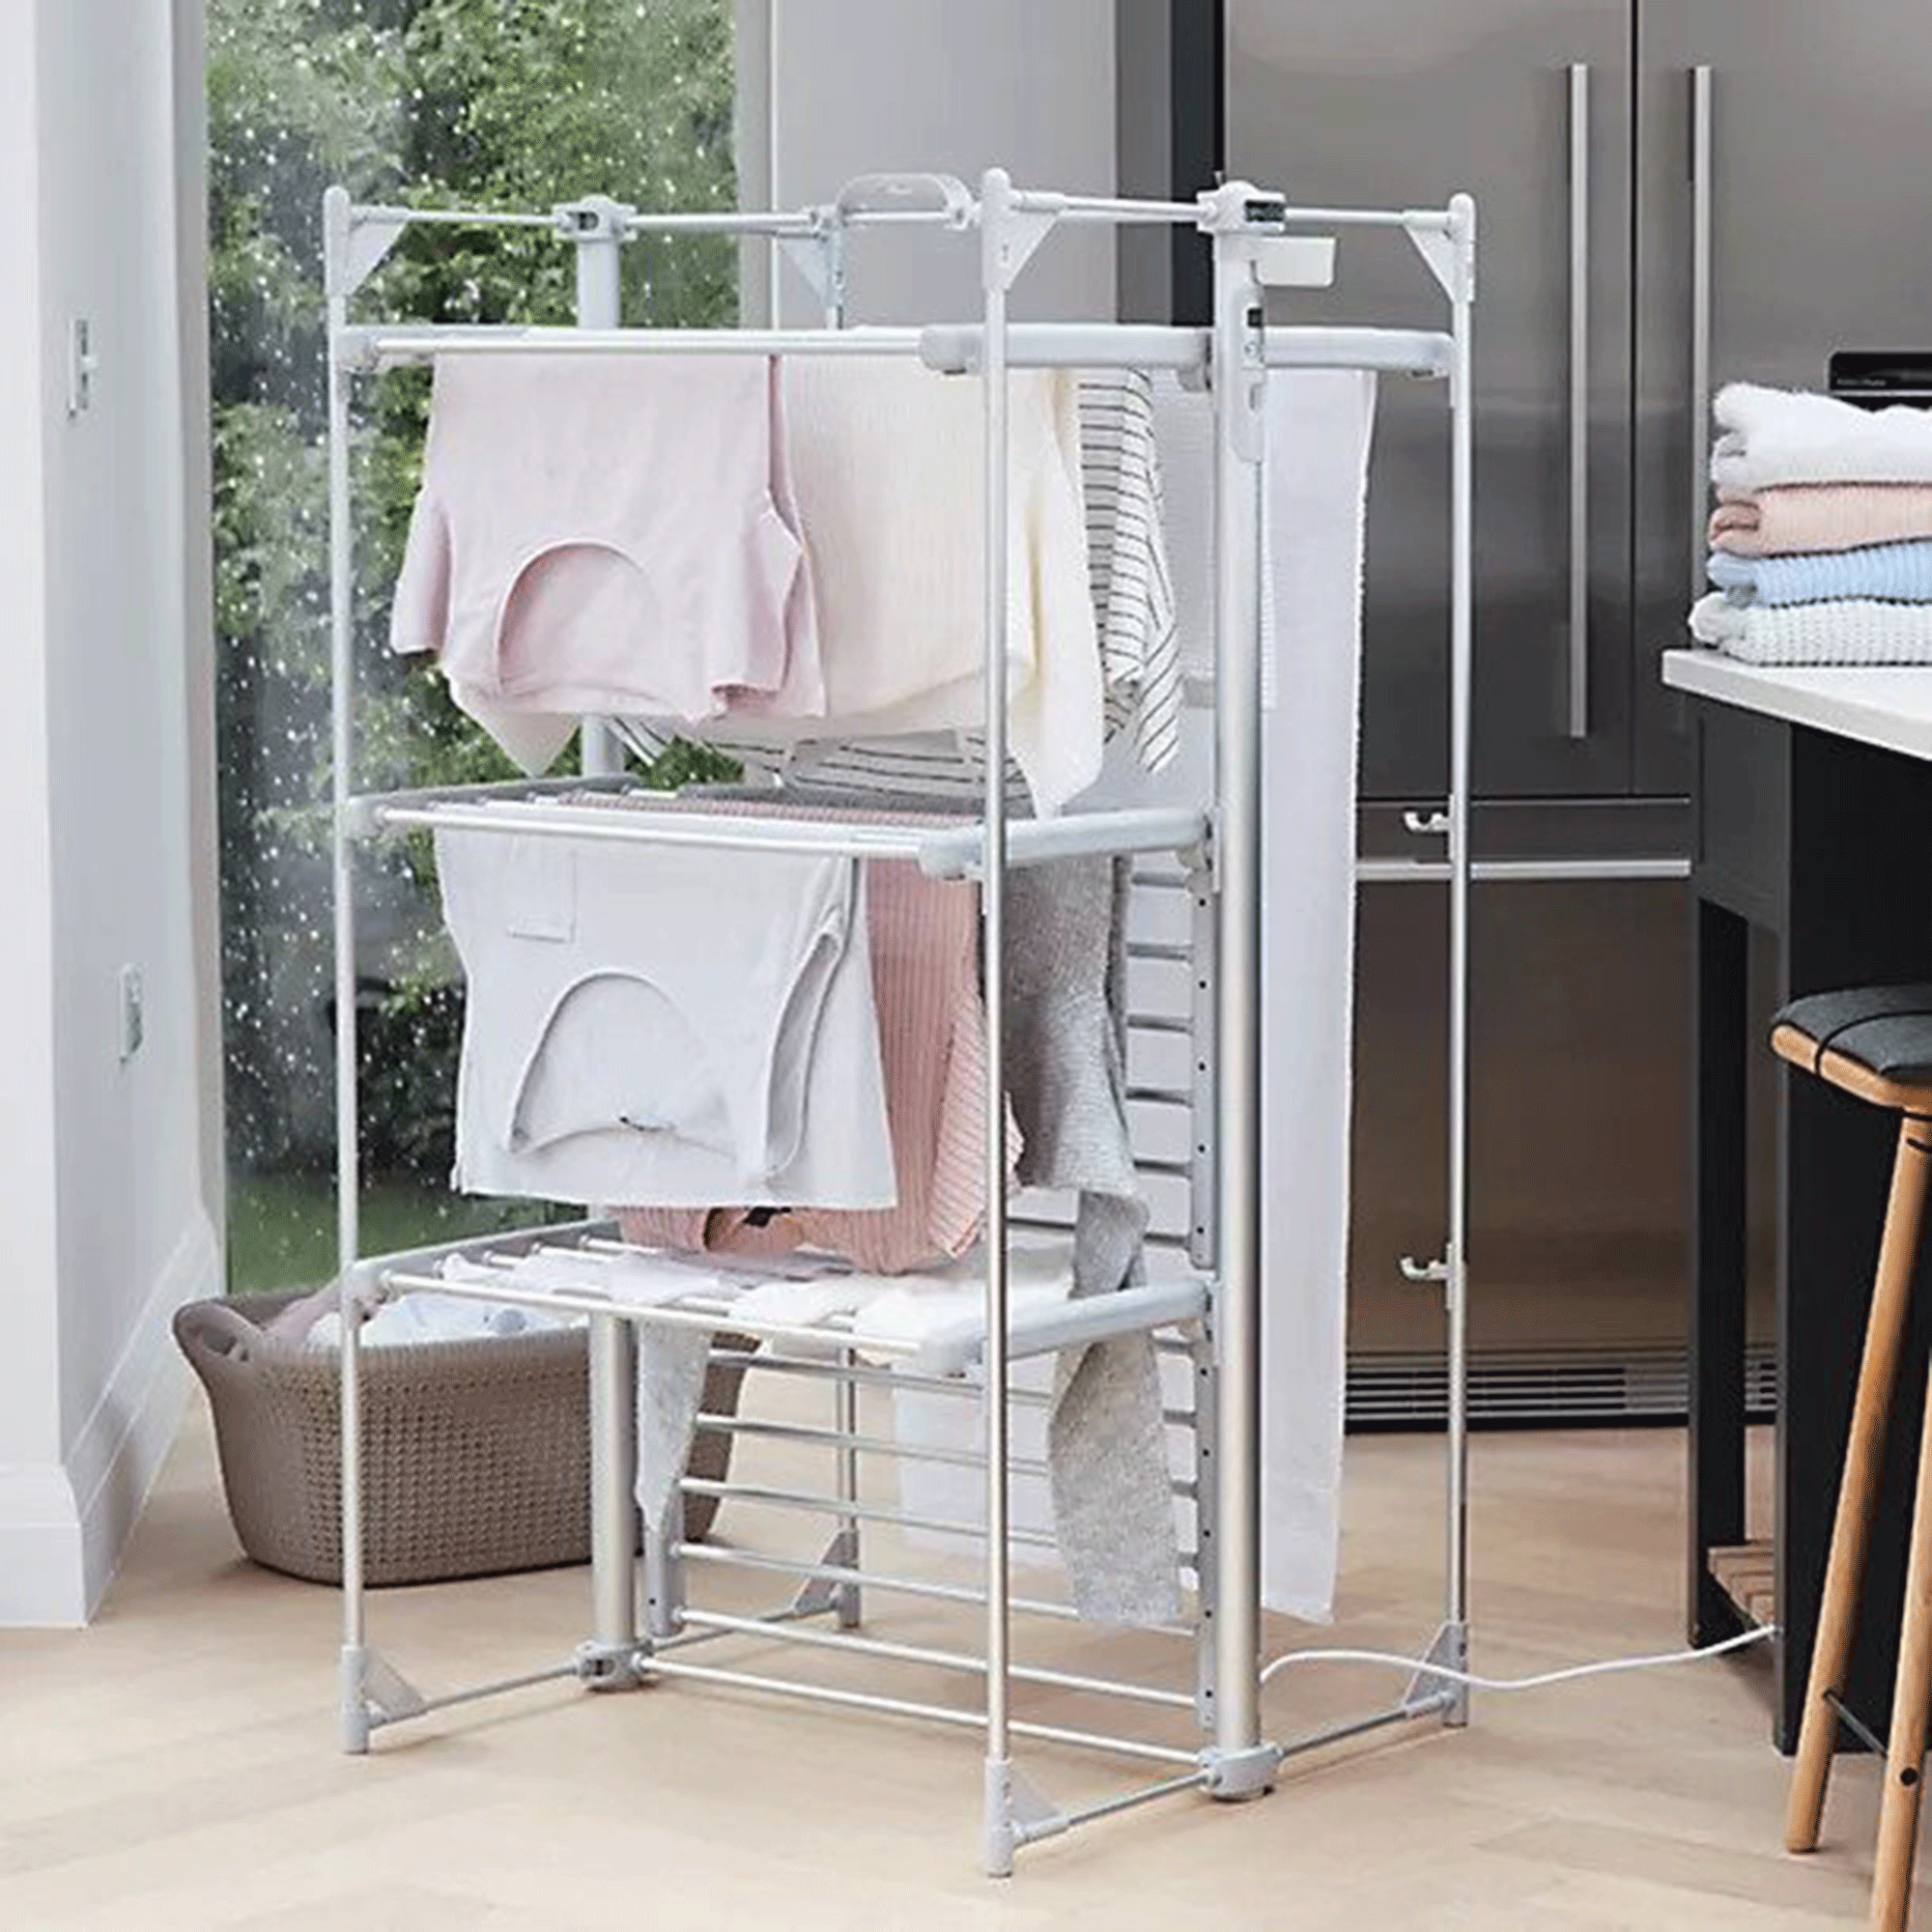 Heated airer three-tier